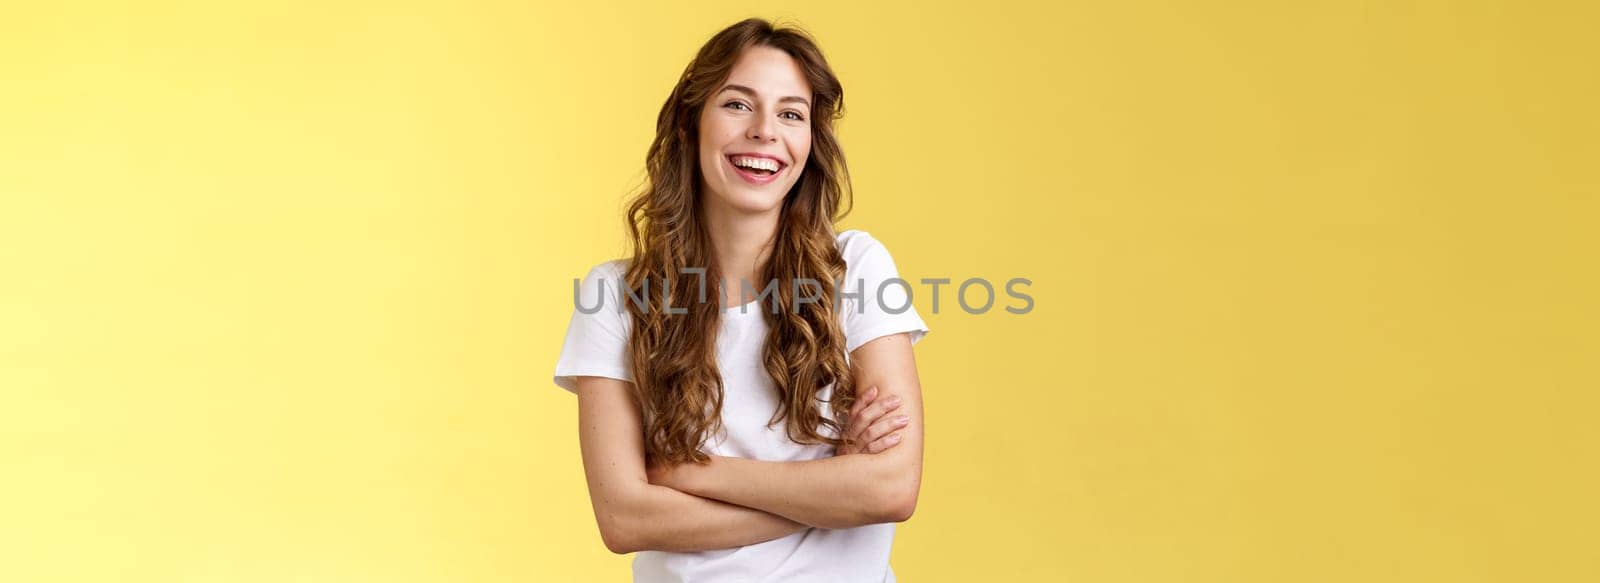 Entertain me. Friendly charismatic female long curly haircut laughing joyfully hang out friends cross arms chest feel chilly slightly cold have amusing pleasant conversation yellow background.